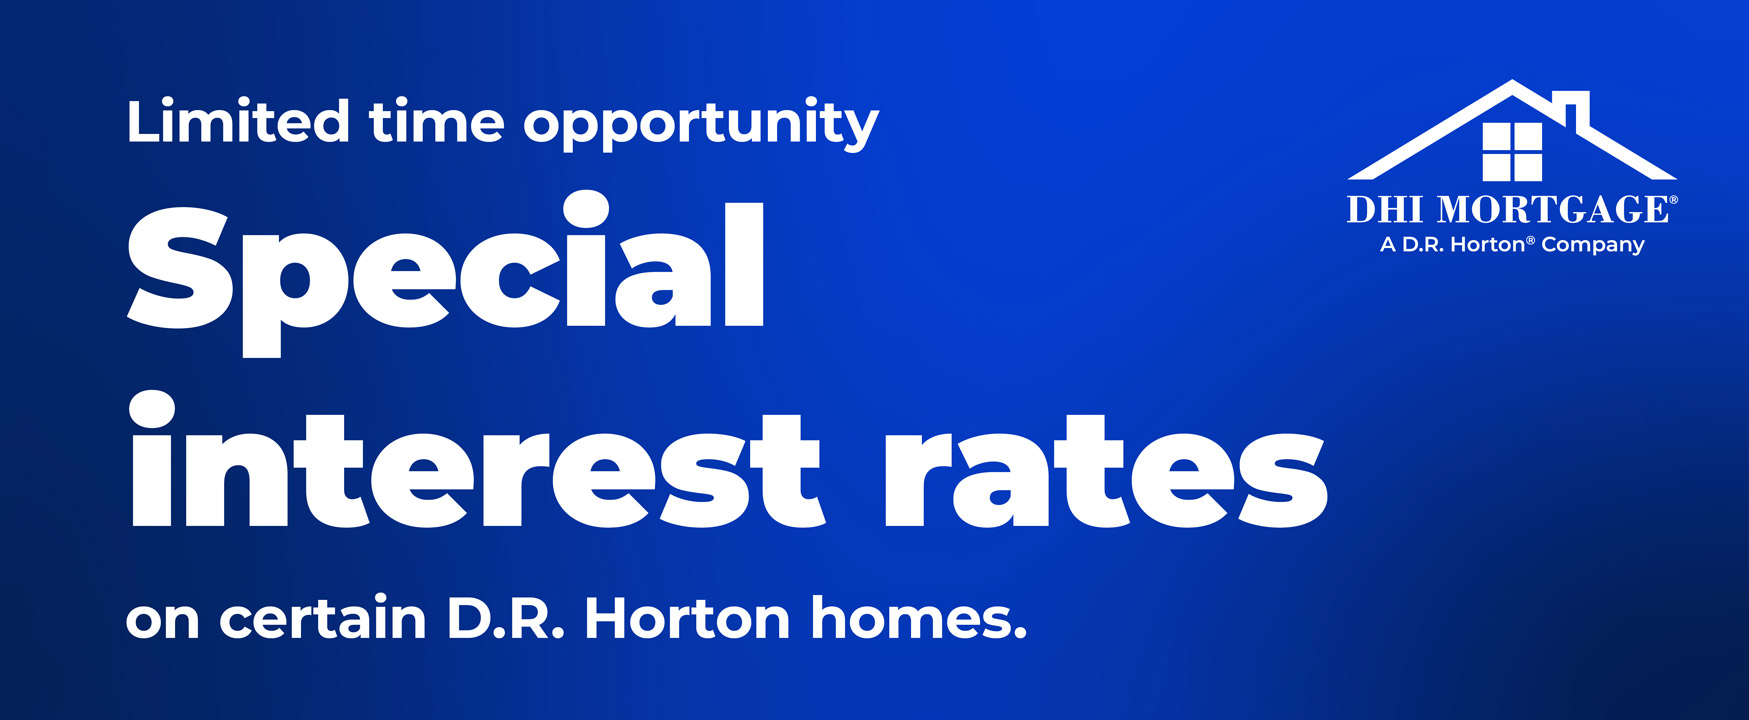 Limited time opportunity. Special interest rates on certain D.R. Horton homes.